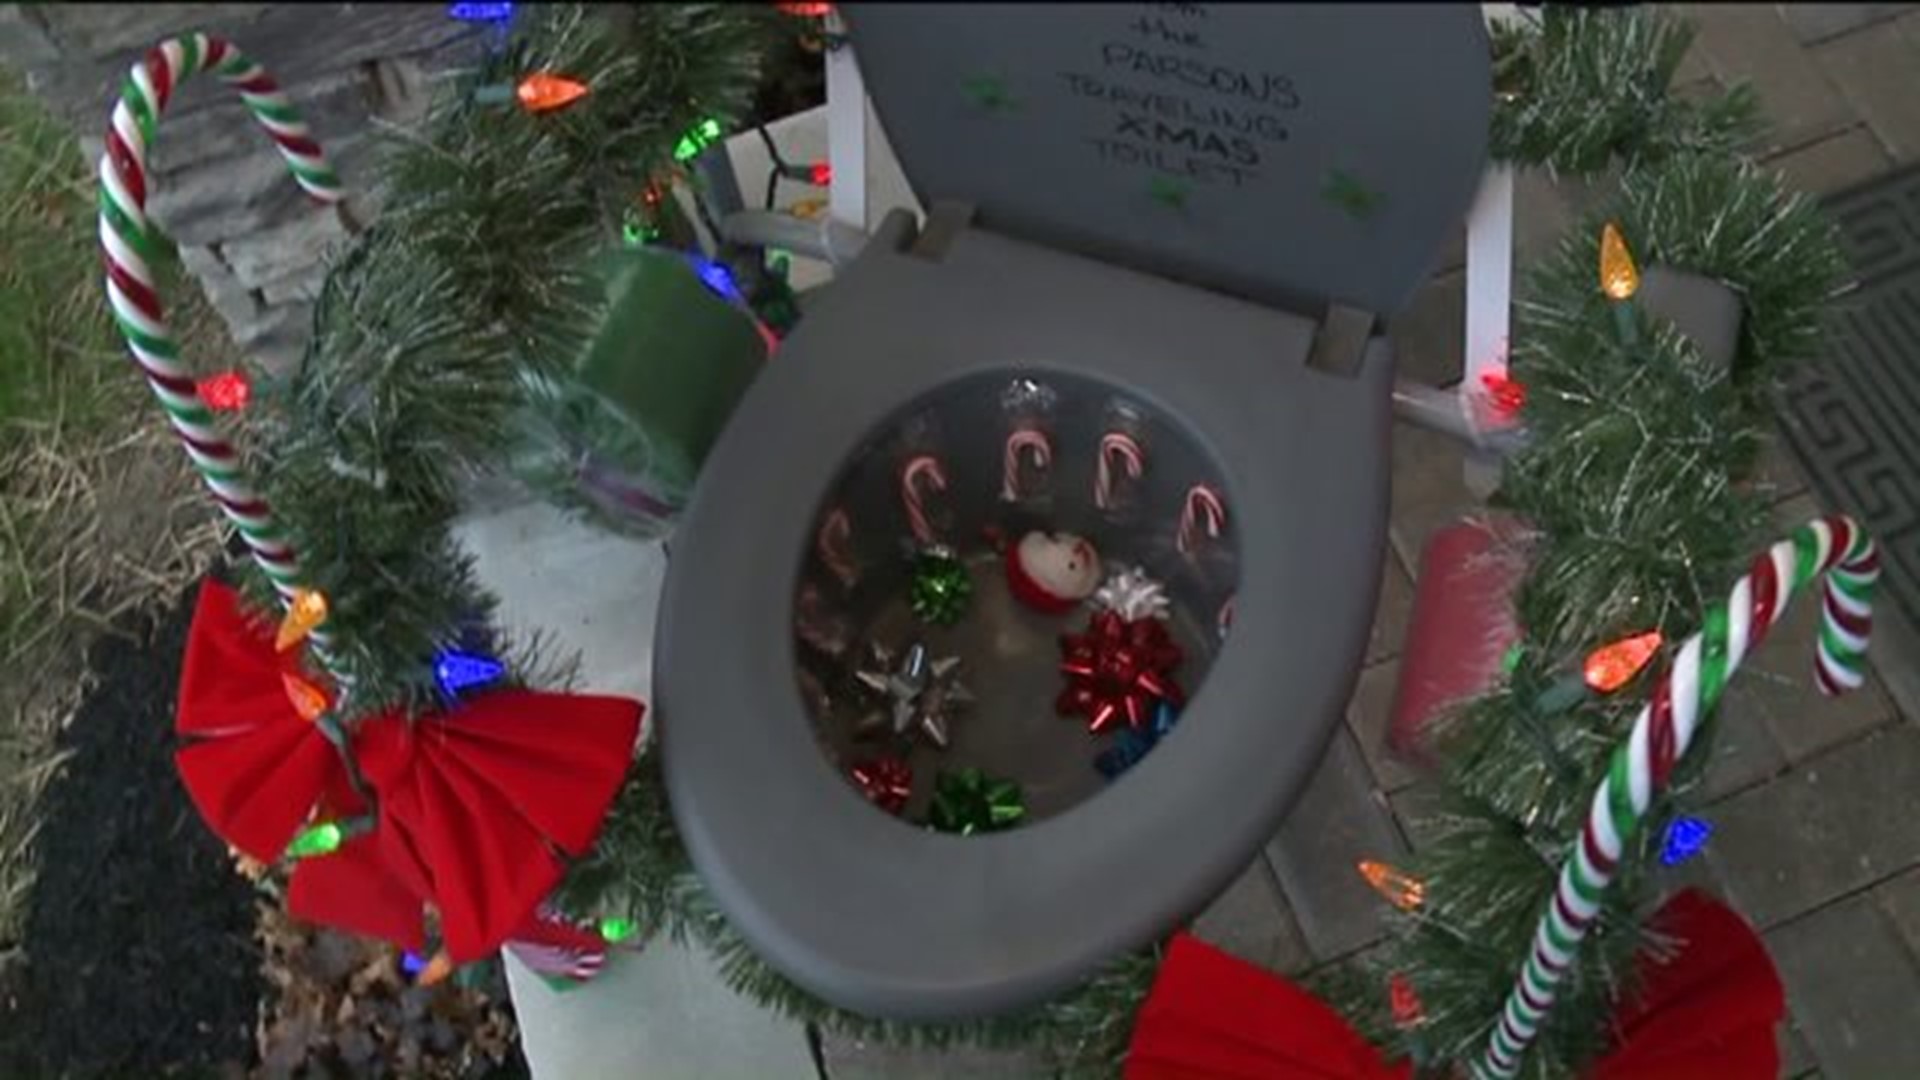 Decorated Potty Chair Brings Christmas Cheer in Wilkes-Barre